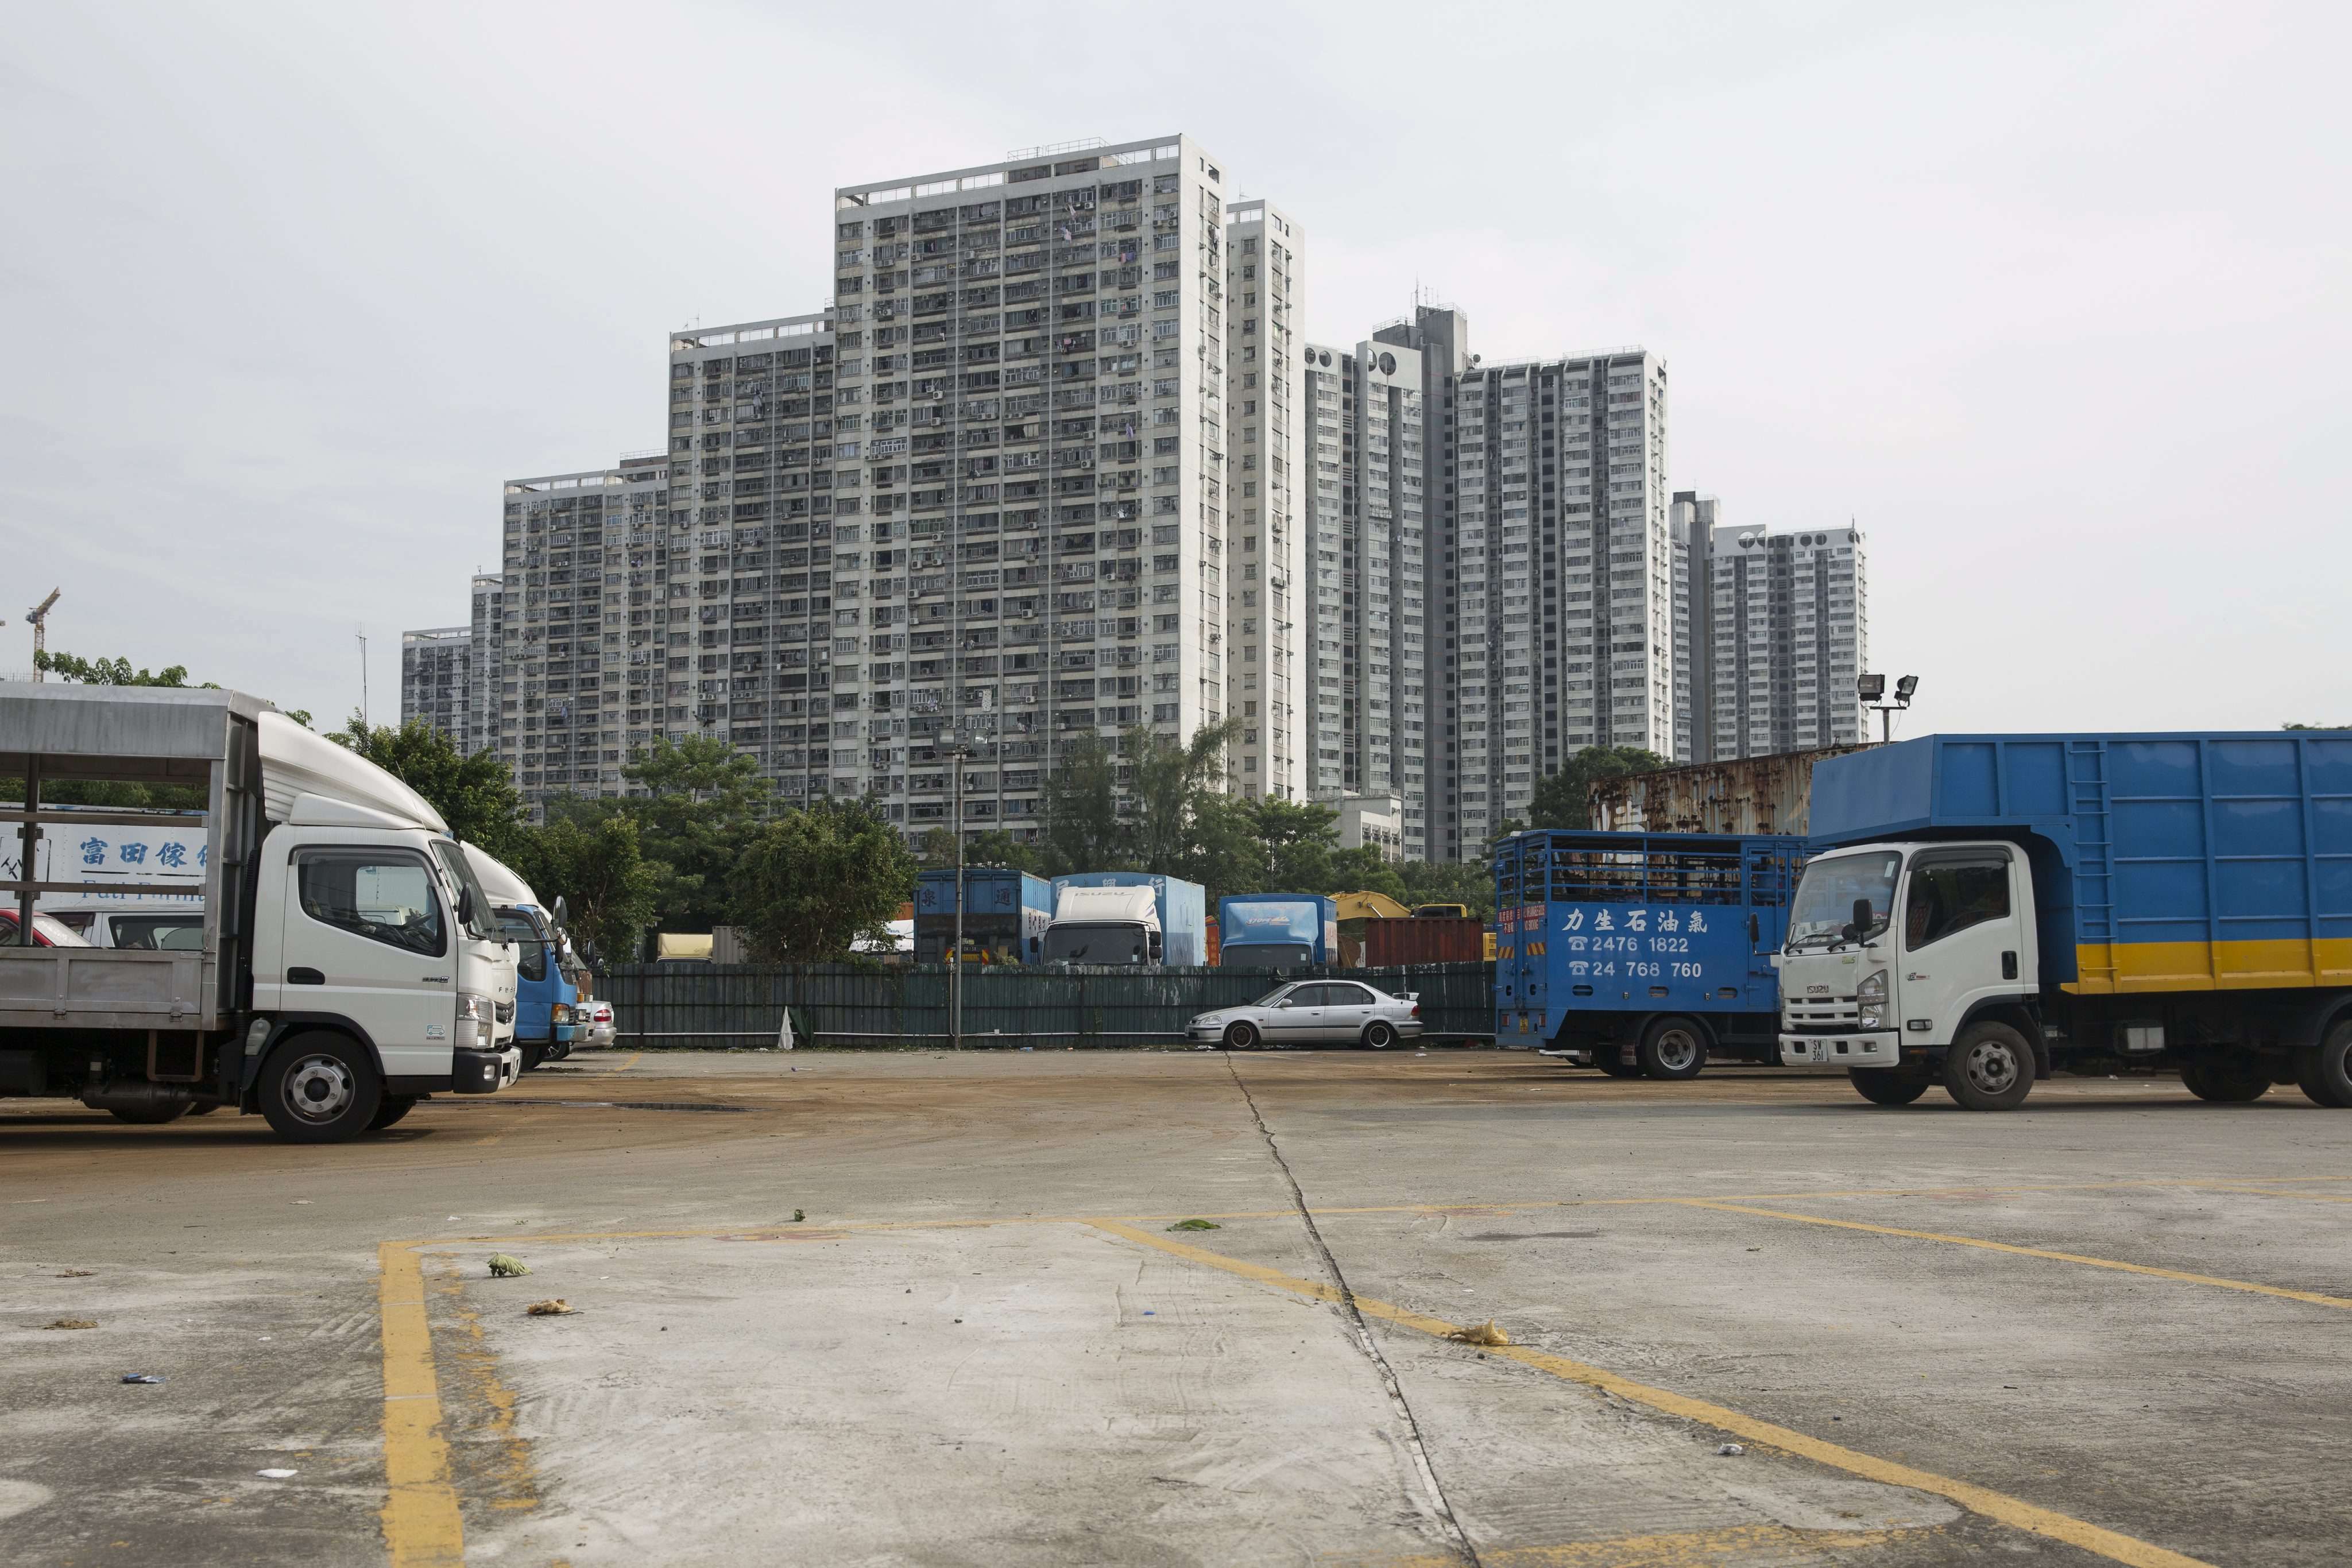 Trucks are parked on an illegally occupied government plot in Wang Chau, Yuen Long. Photo: EPA